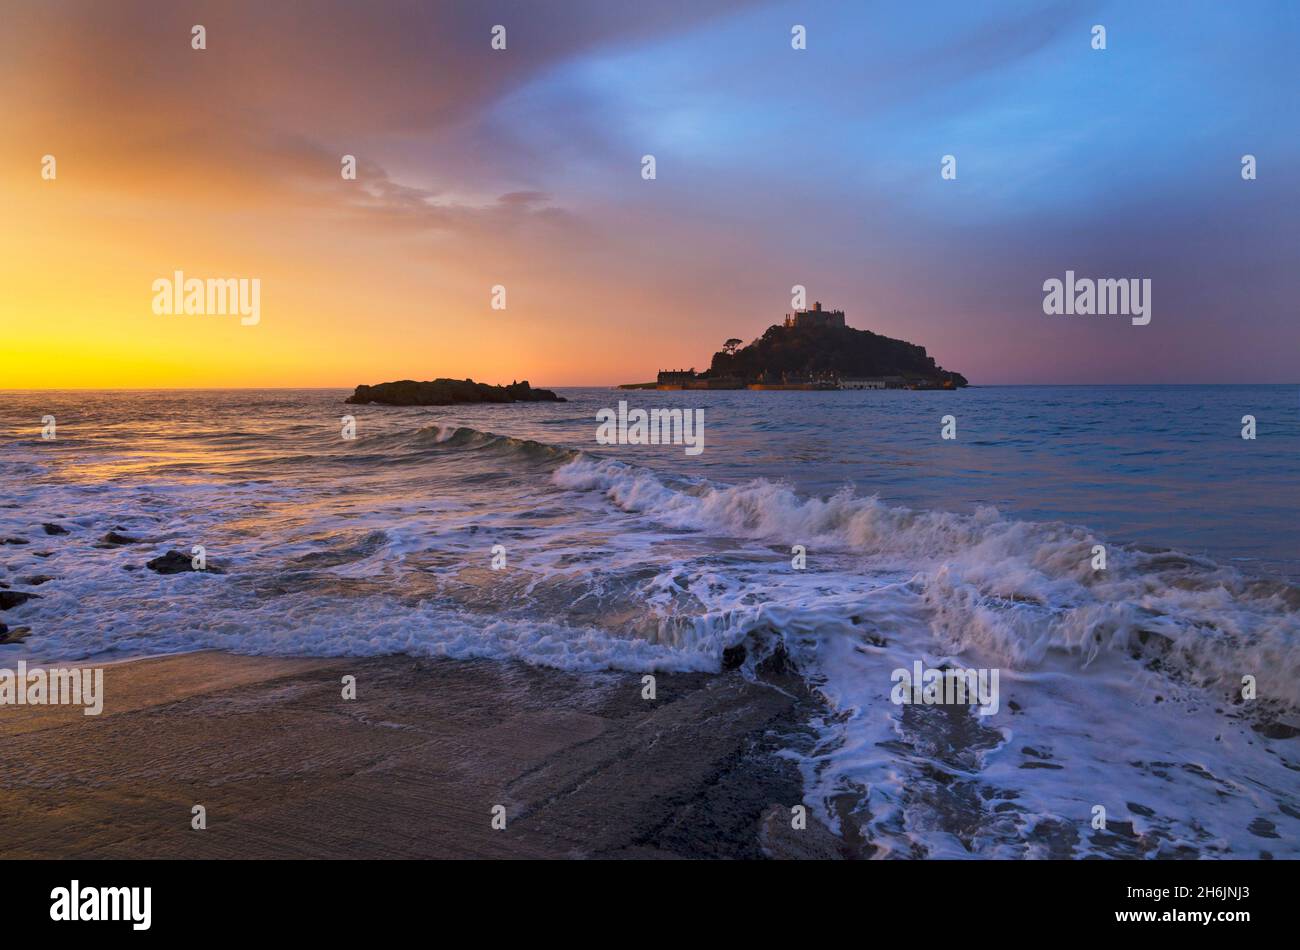 St Michaels Mount Mounts Bay Marazion Cornwall Kernow England at dawn castle silhouetted against sky copy space sea surf waves rocks Stock Photo